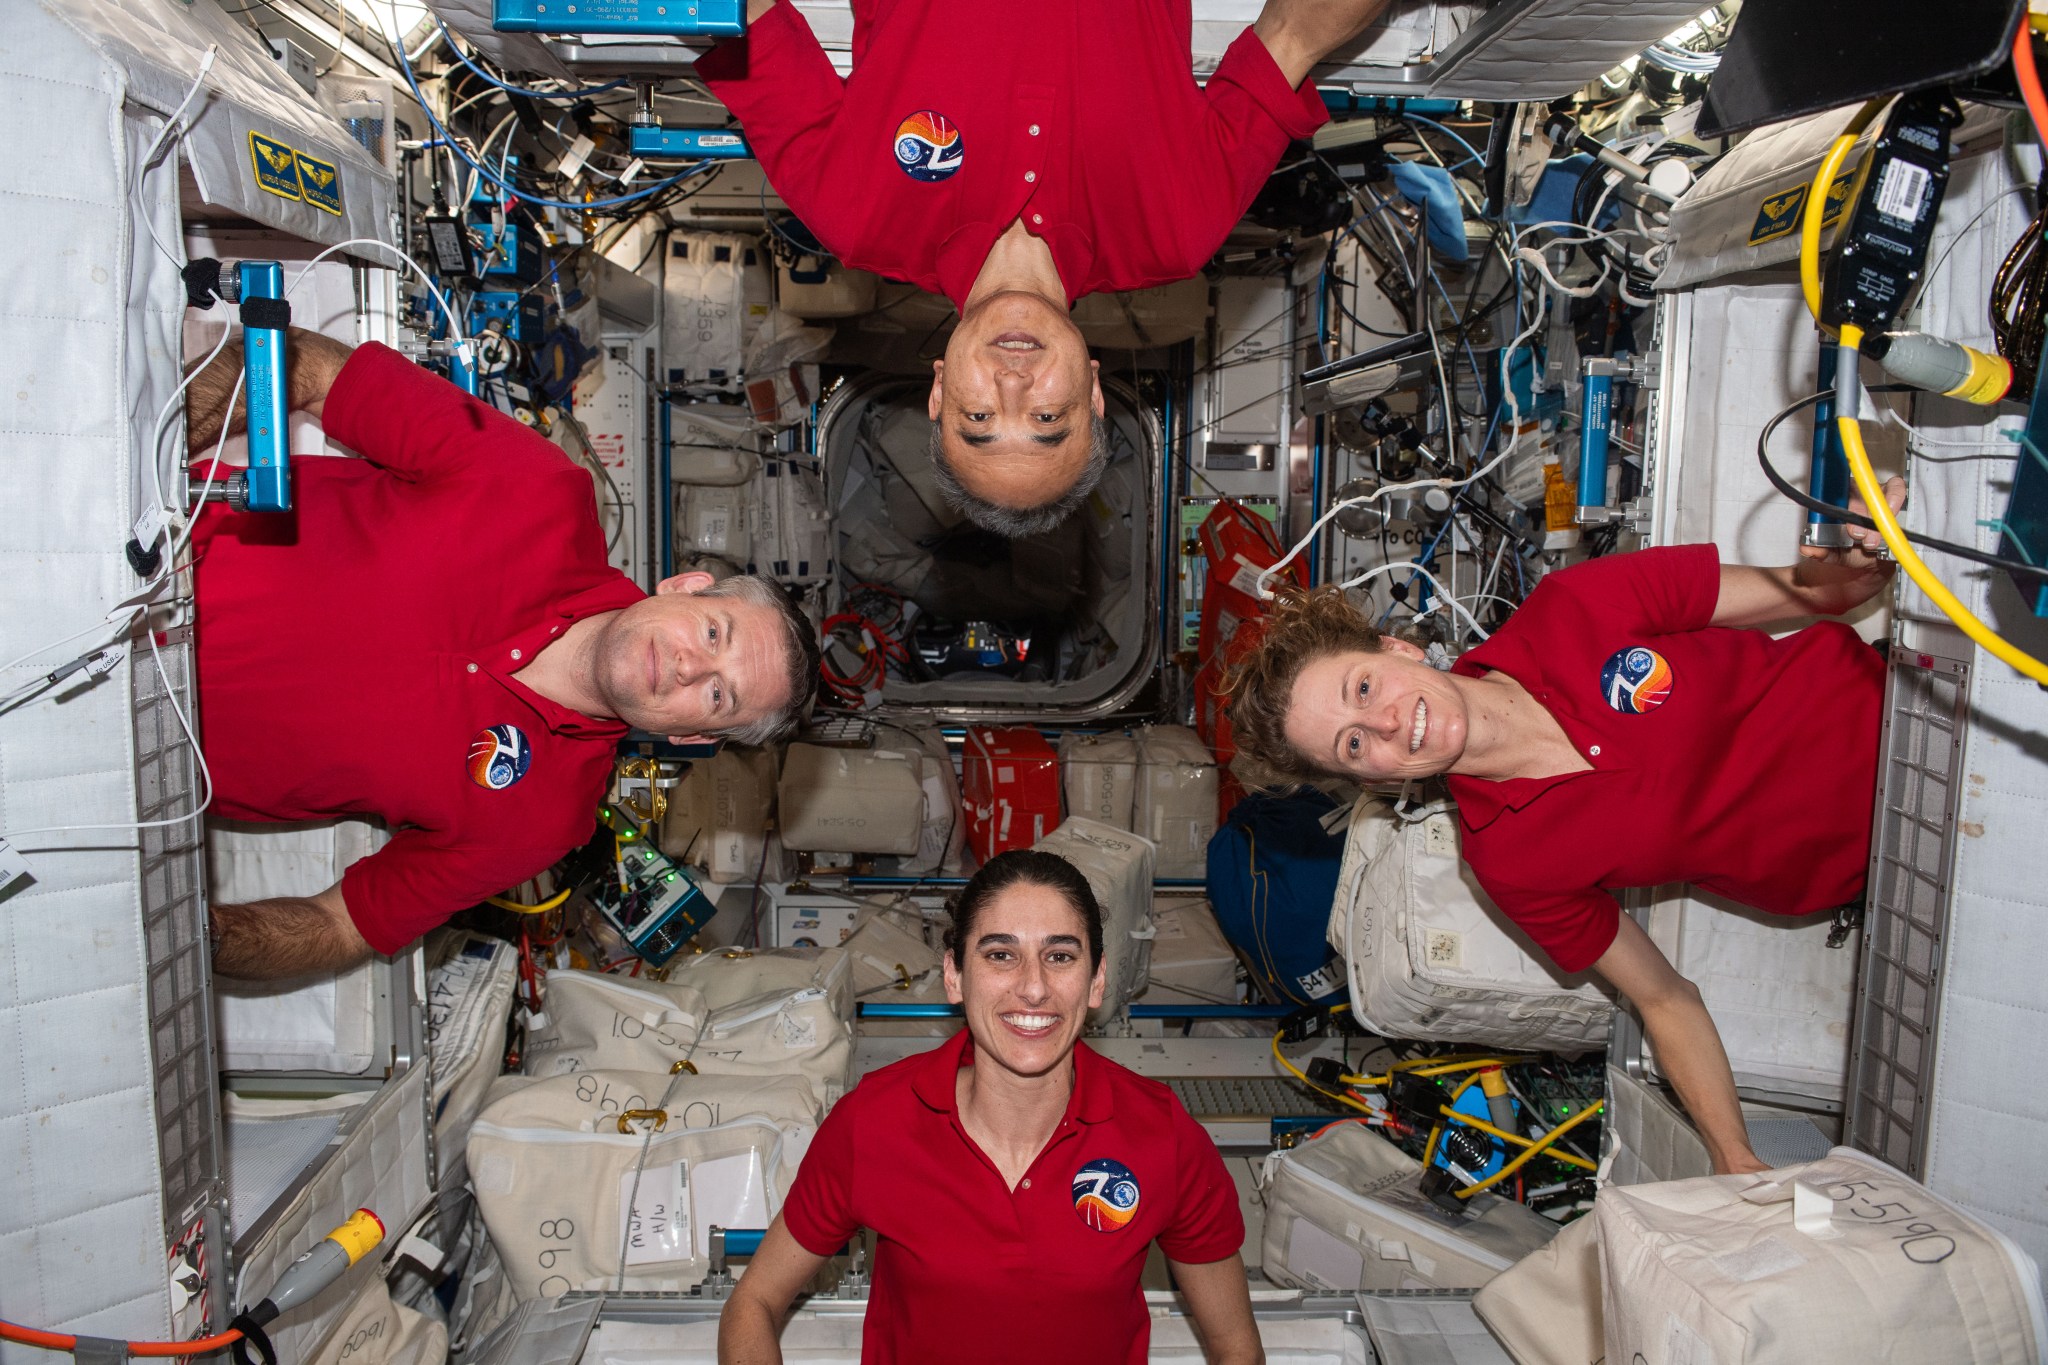 4 Astronauts on the ISS in red shirts